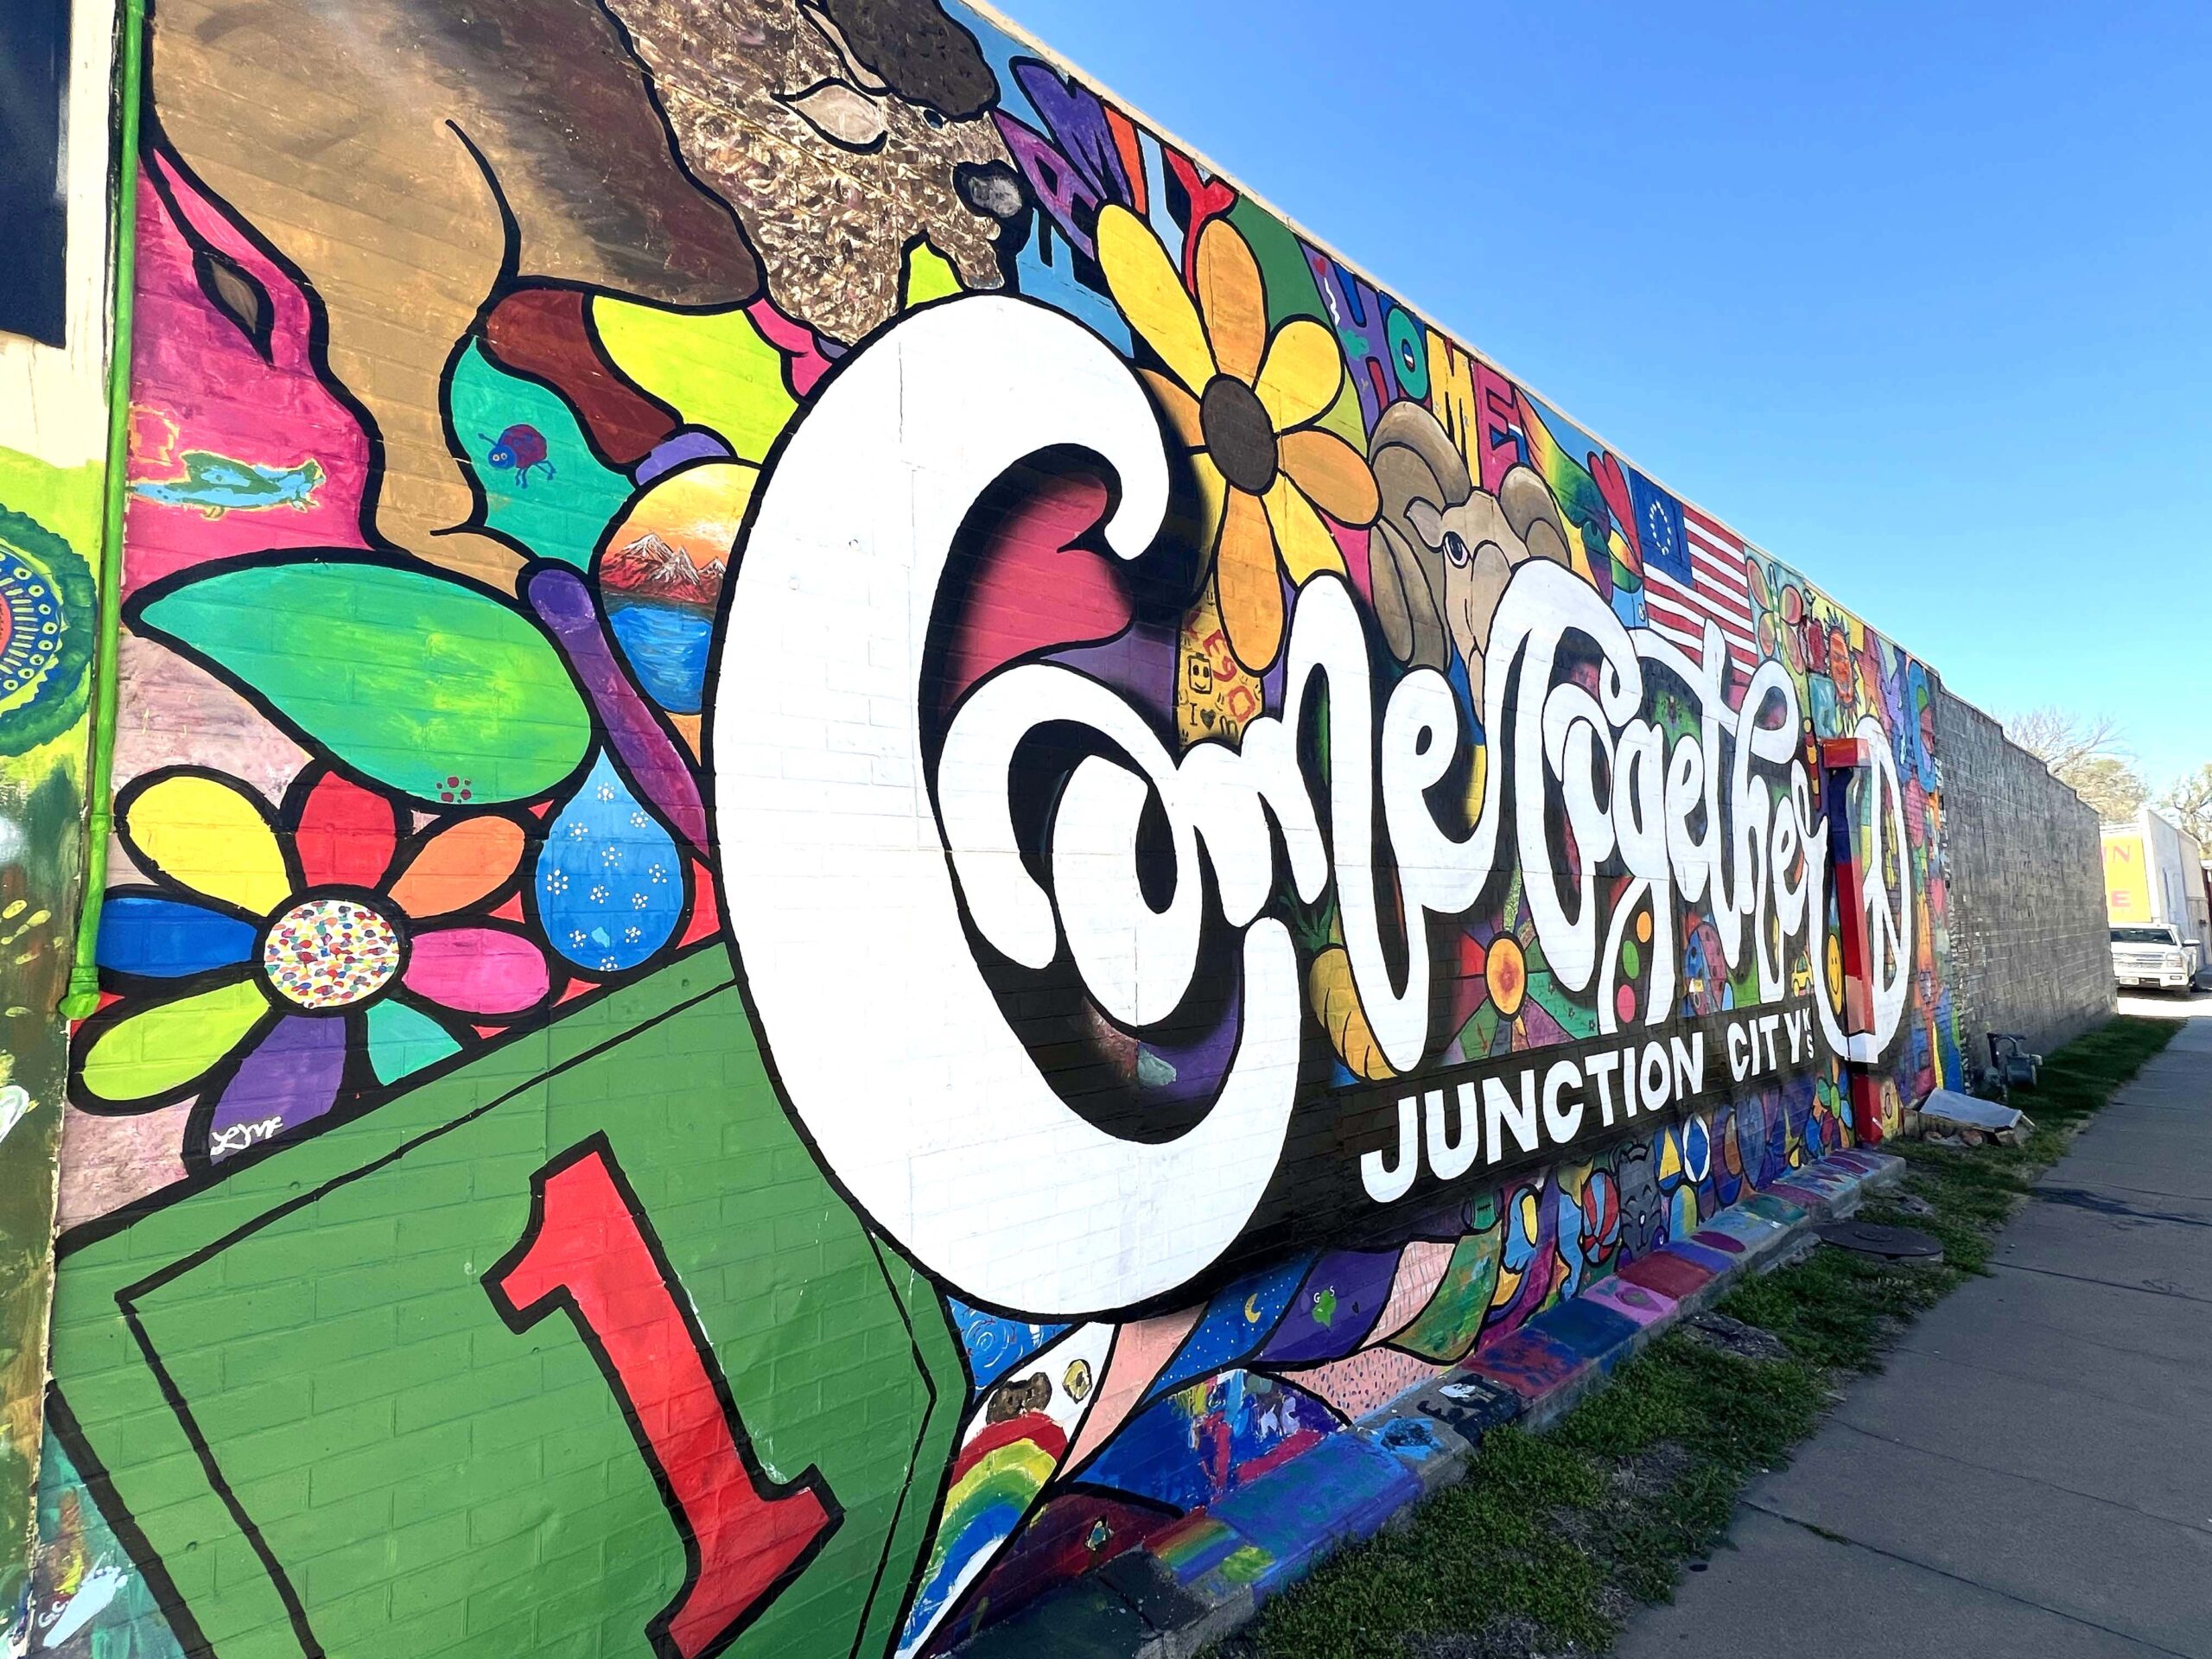 Come Together Mural